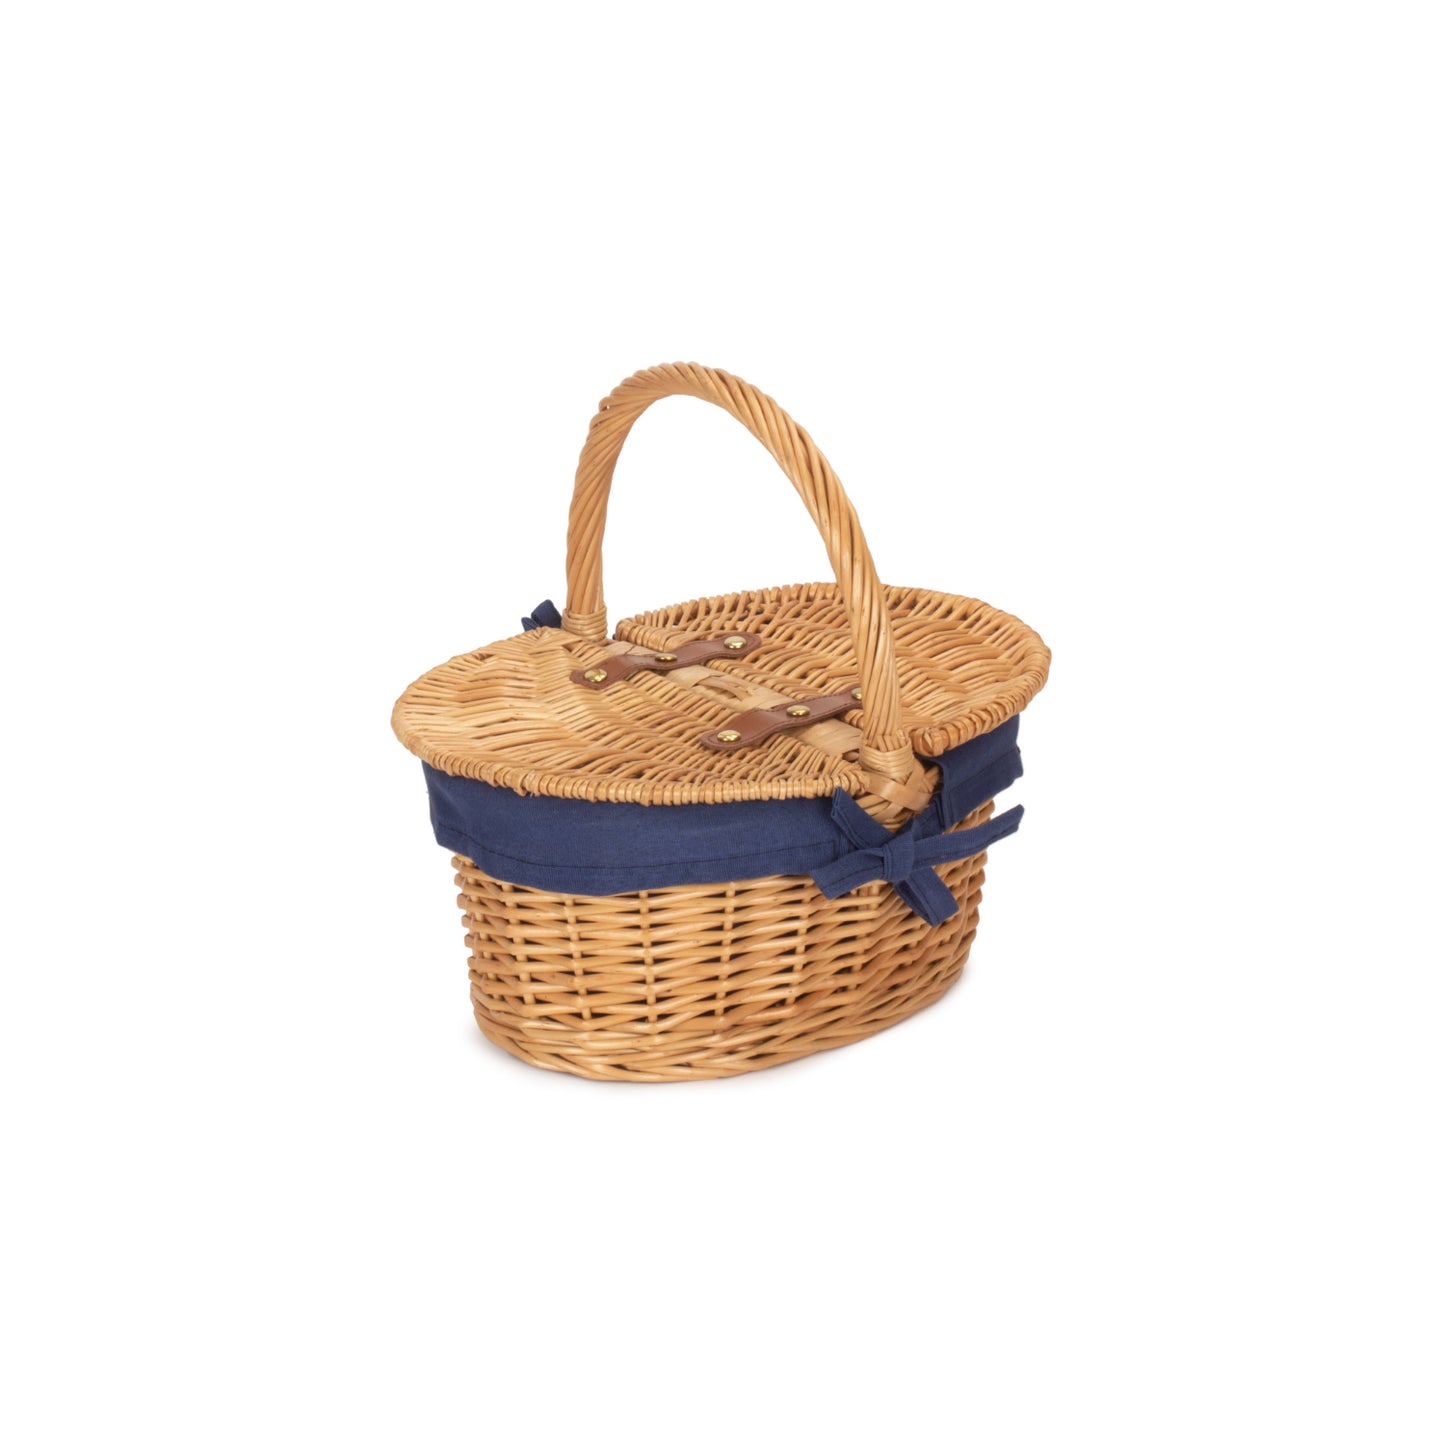 Child's Oval Lined Lidded Hamper With Navy Blue Lining